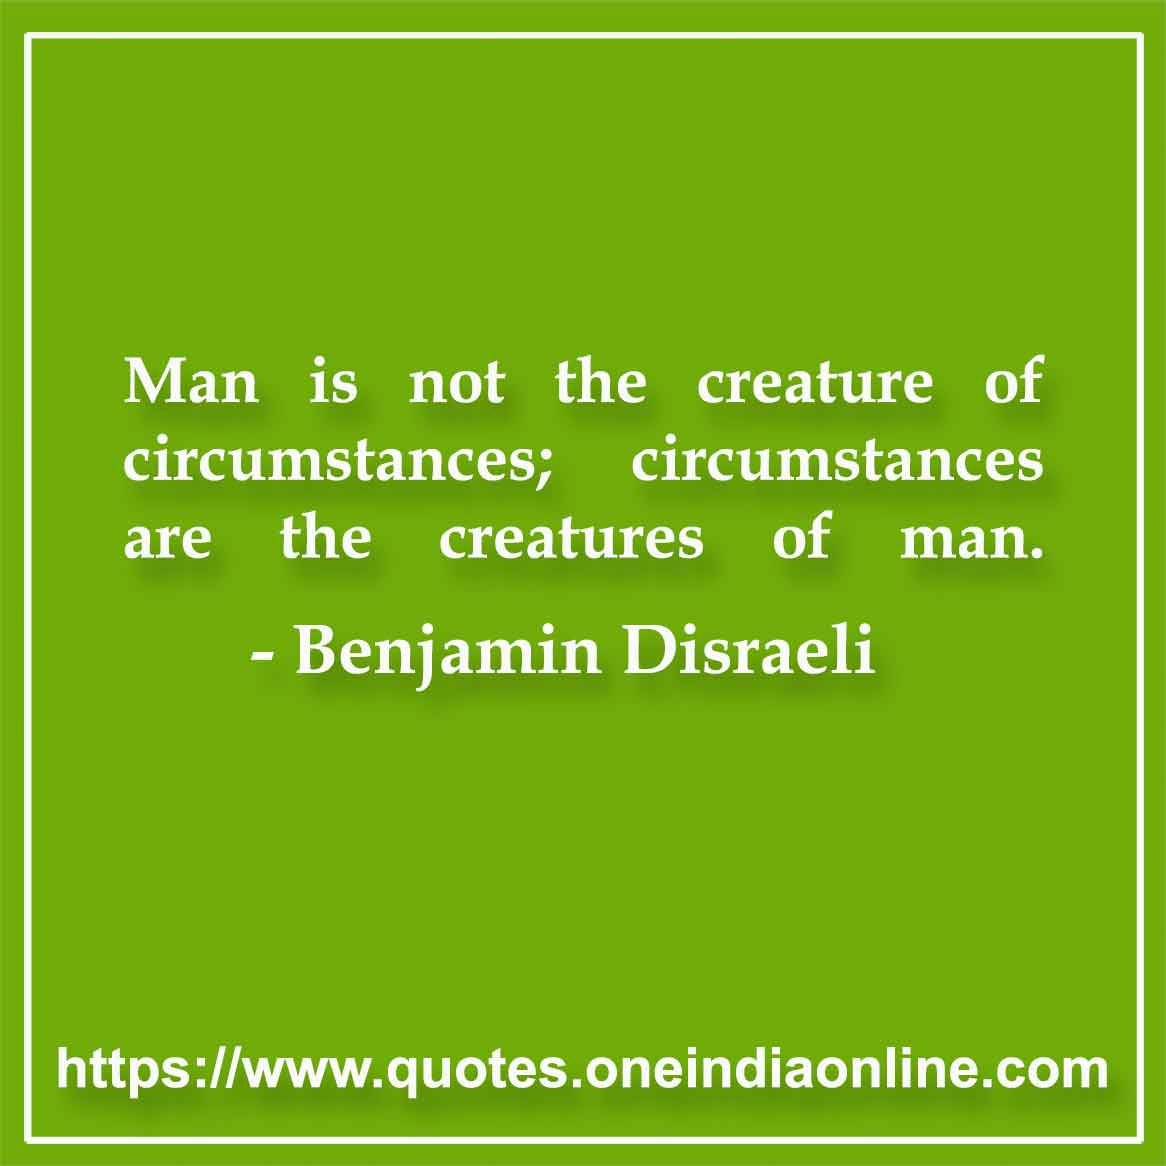 Man is not the creature of circumstances; circumstances are the creatures of man.

-by Benjamin Disraeli 